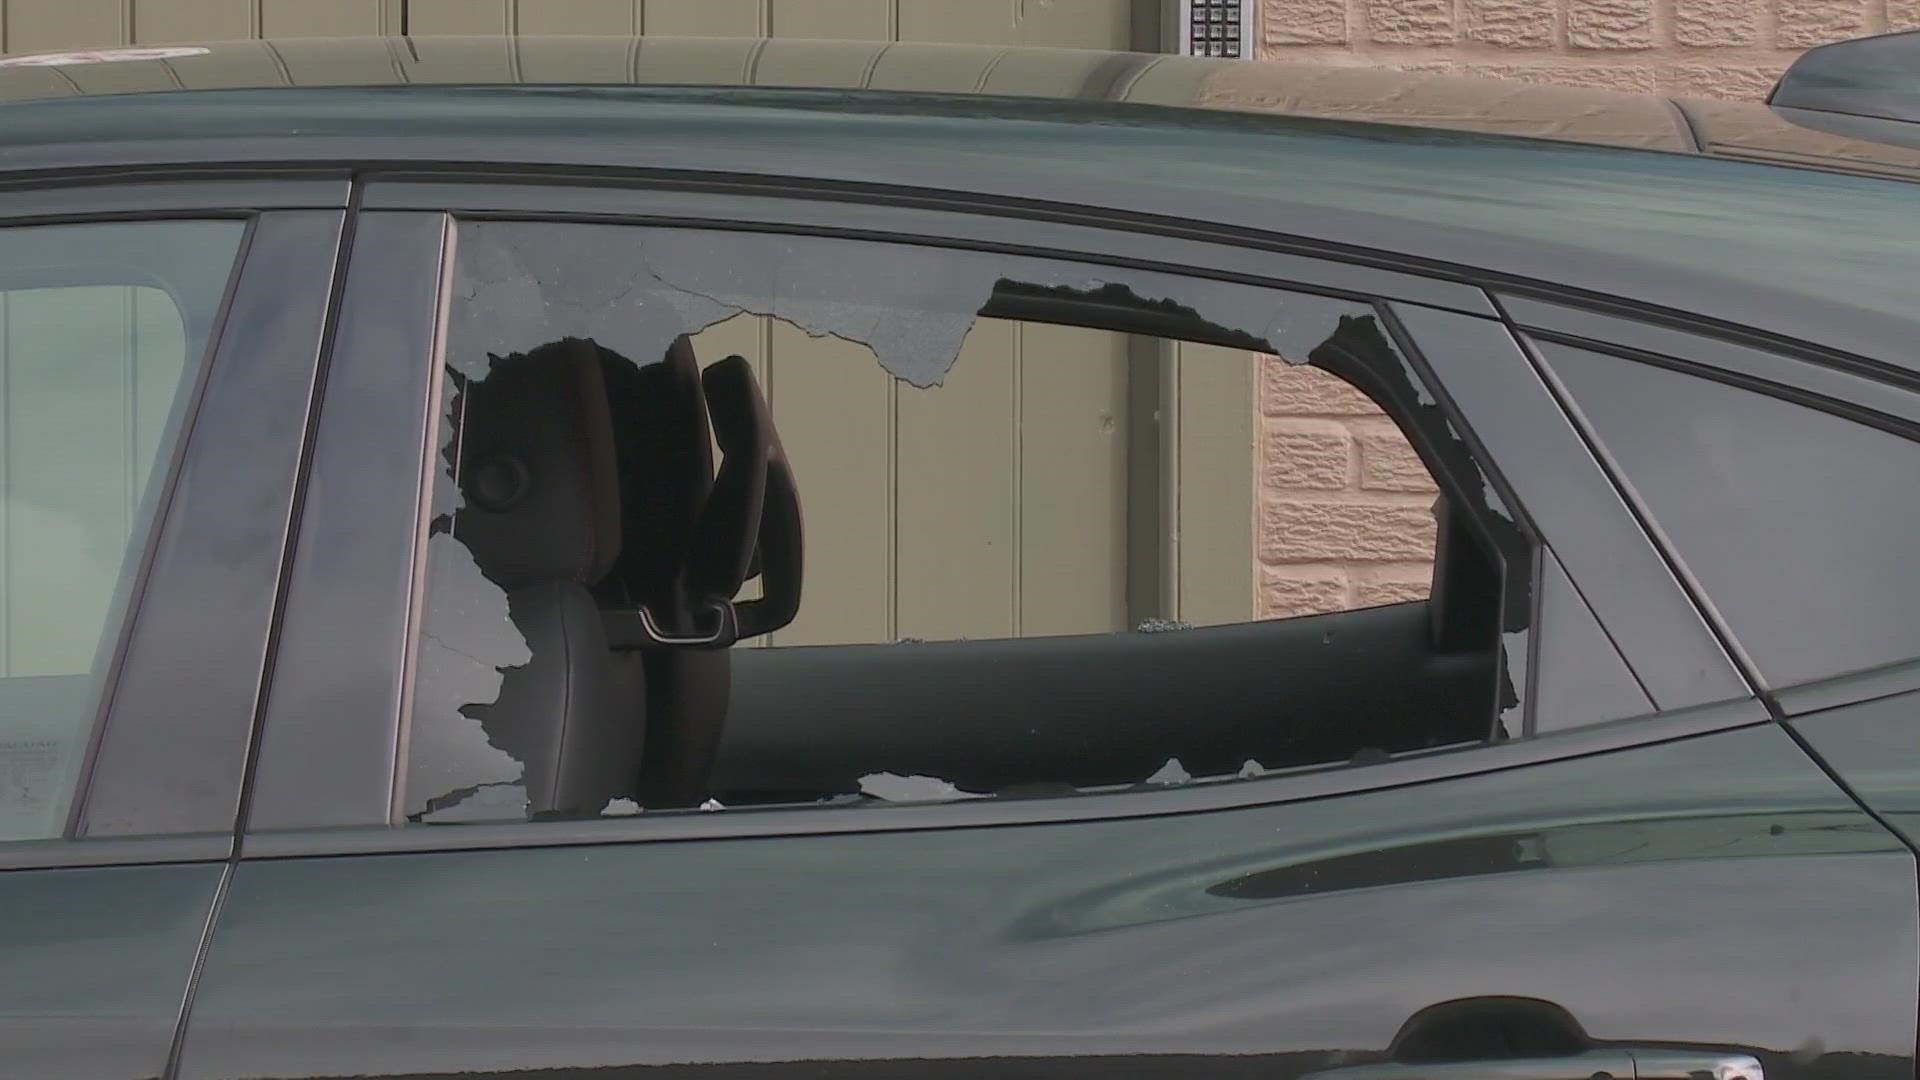 The woman said she heard shots and that the glass in her rear window was shot out.